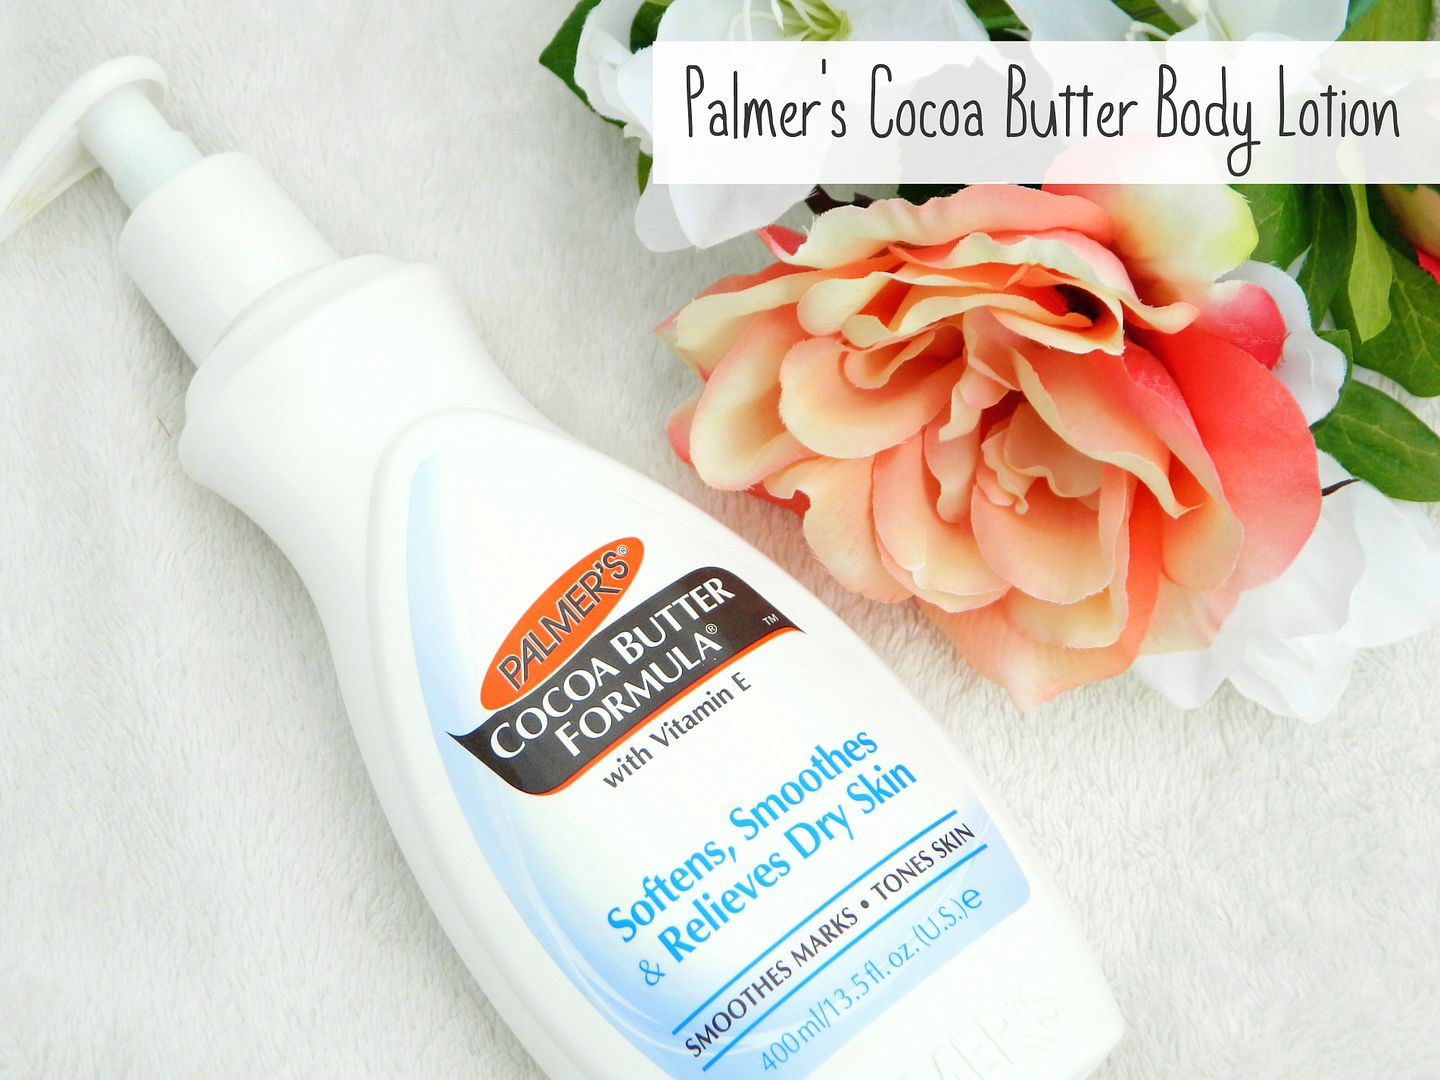 Daily Favourites Palmer's Cocoa Butter Plump Body Lotion Review Belle-amie UK Beauty Fashion Lifestyle Blog